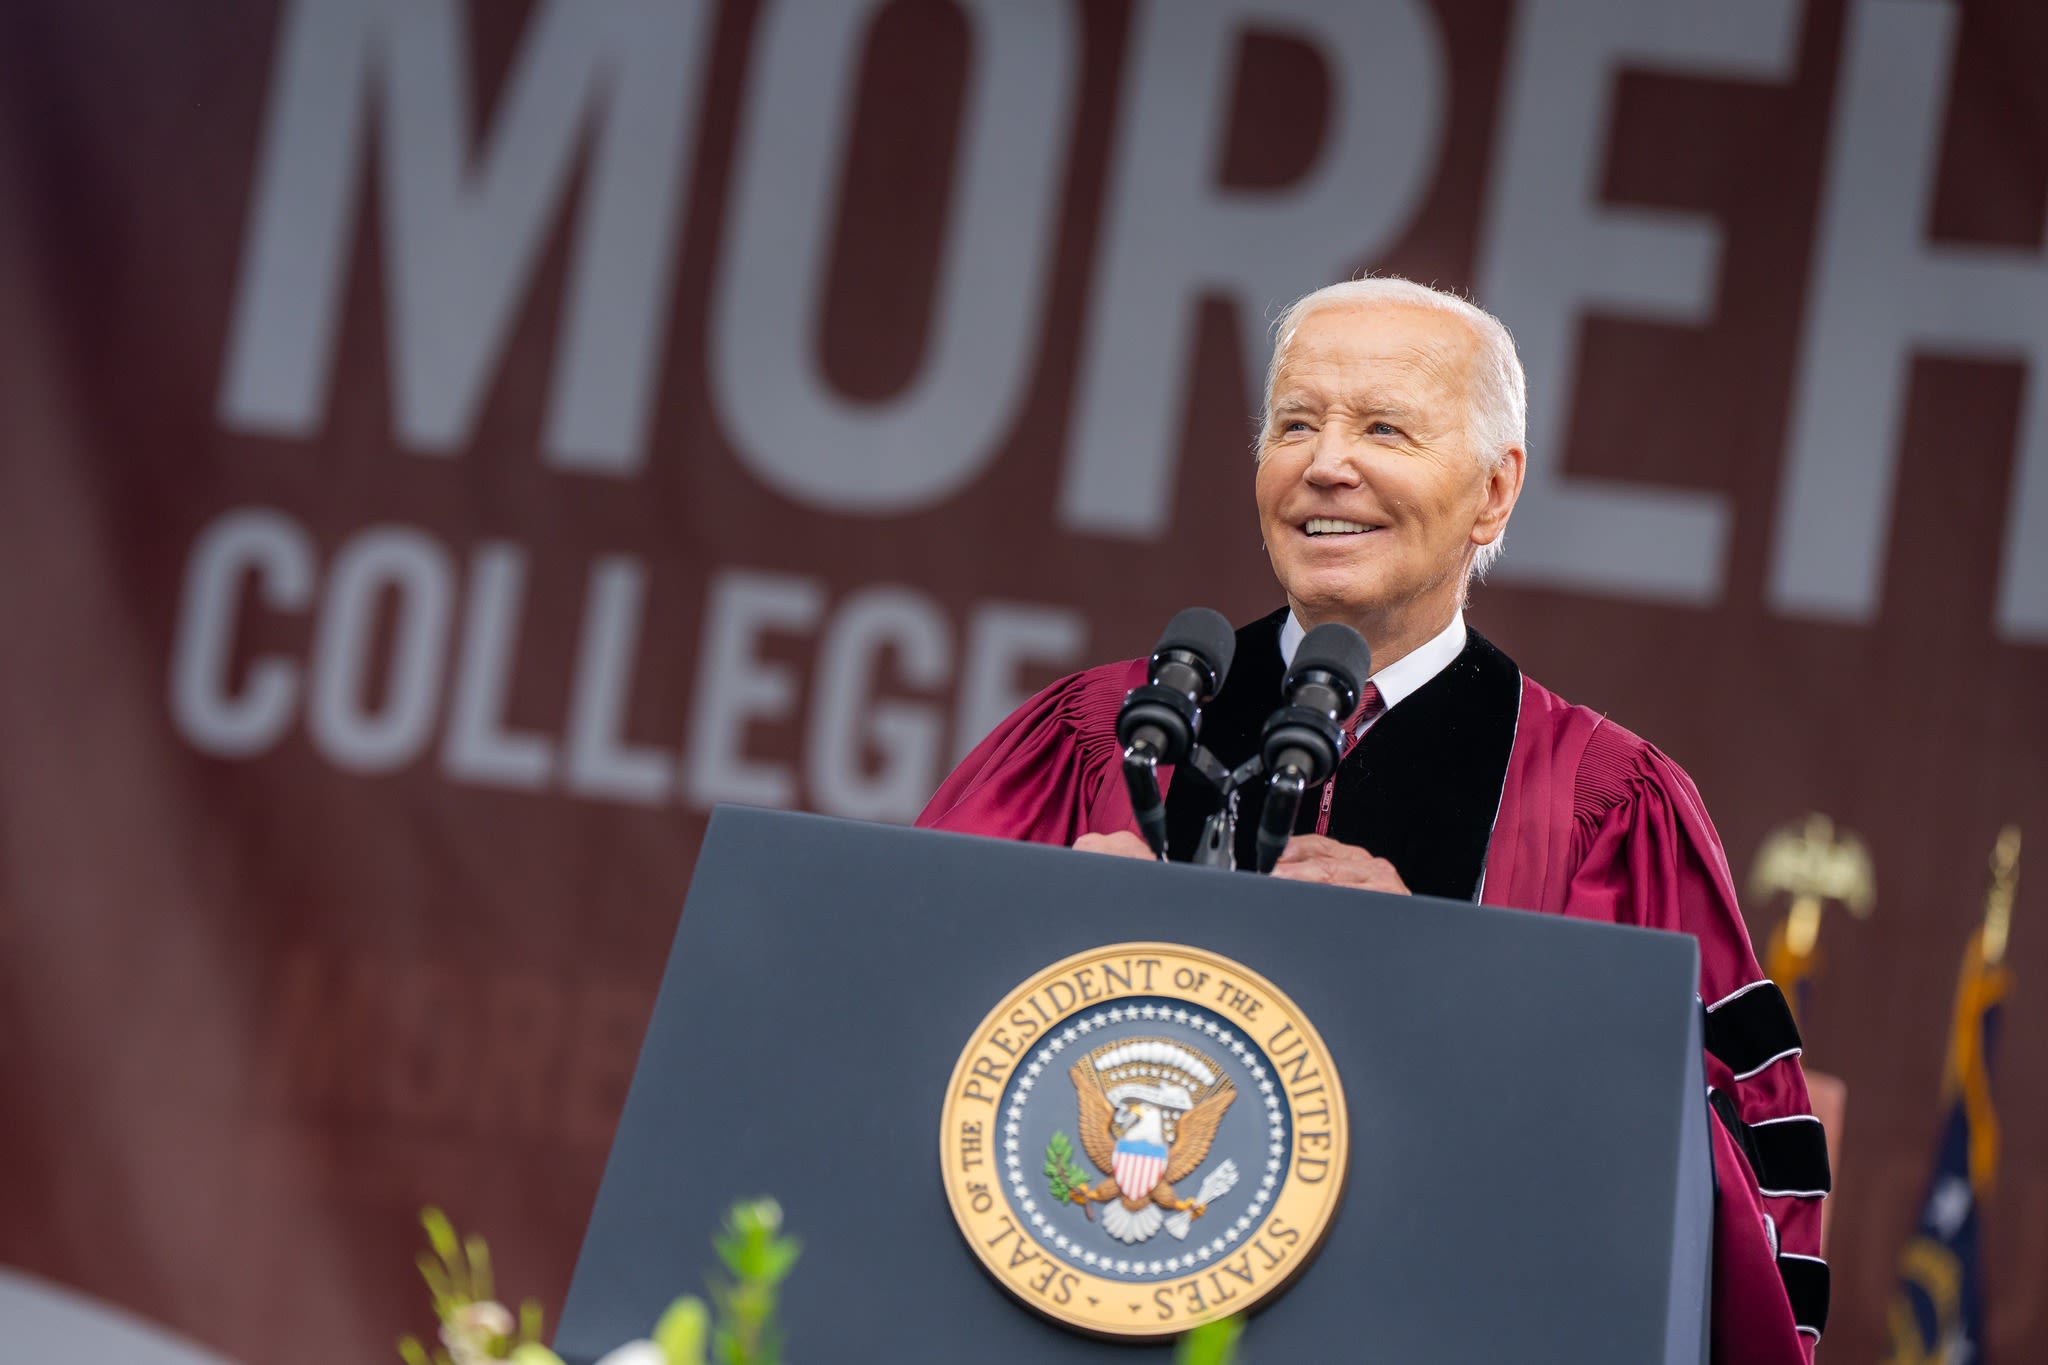 Biden at Morehouse: No Apology for Democrat Support of Slavery - The American Spectator | USA News and Politics